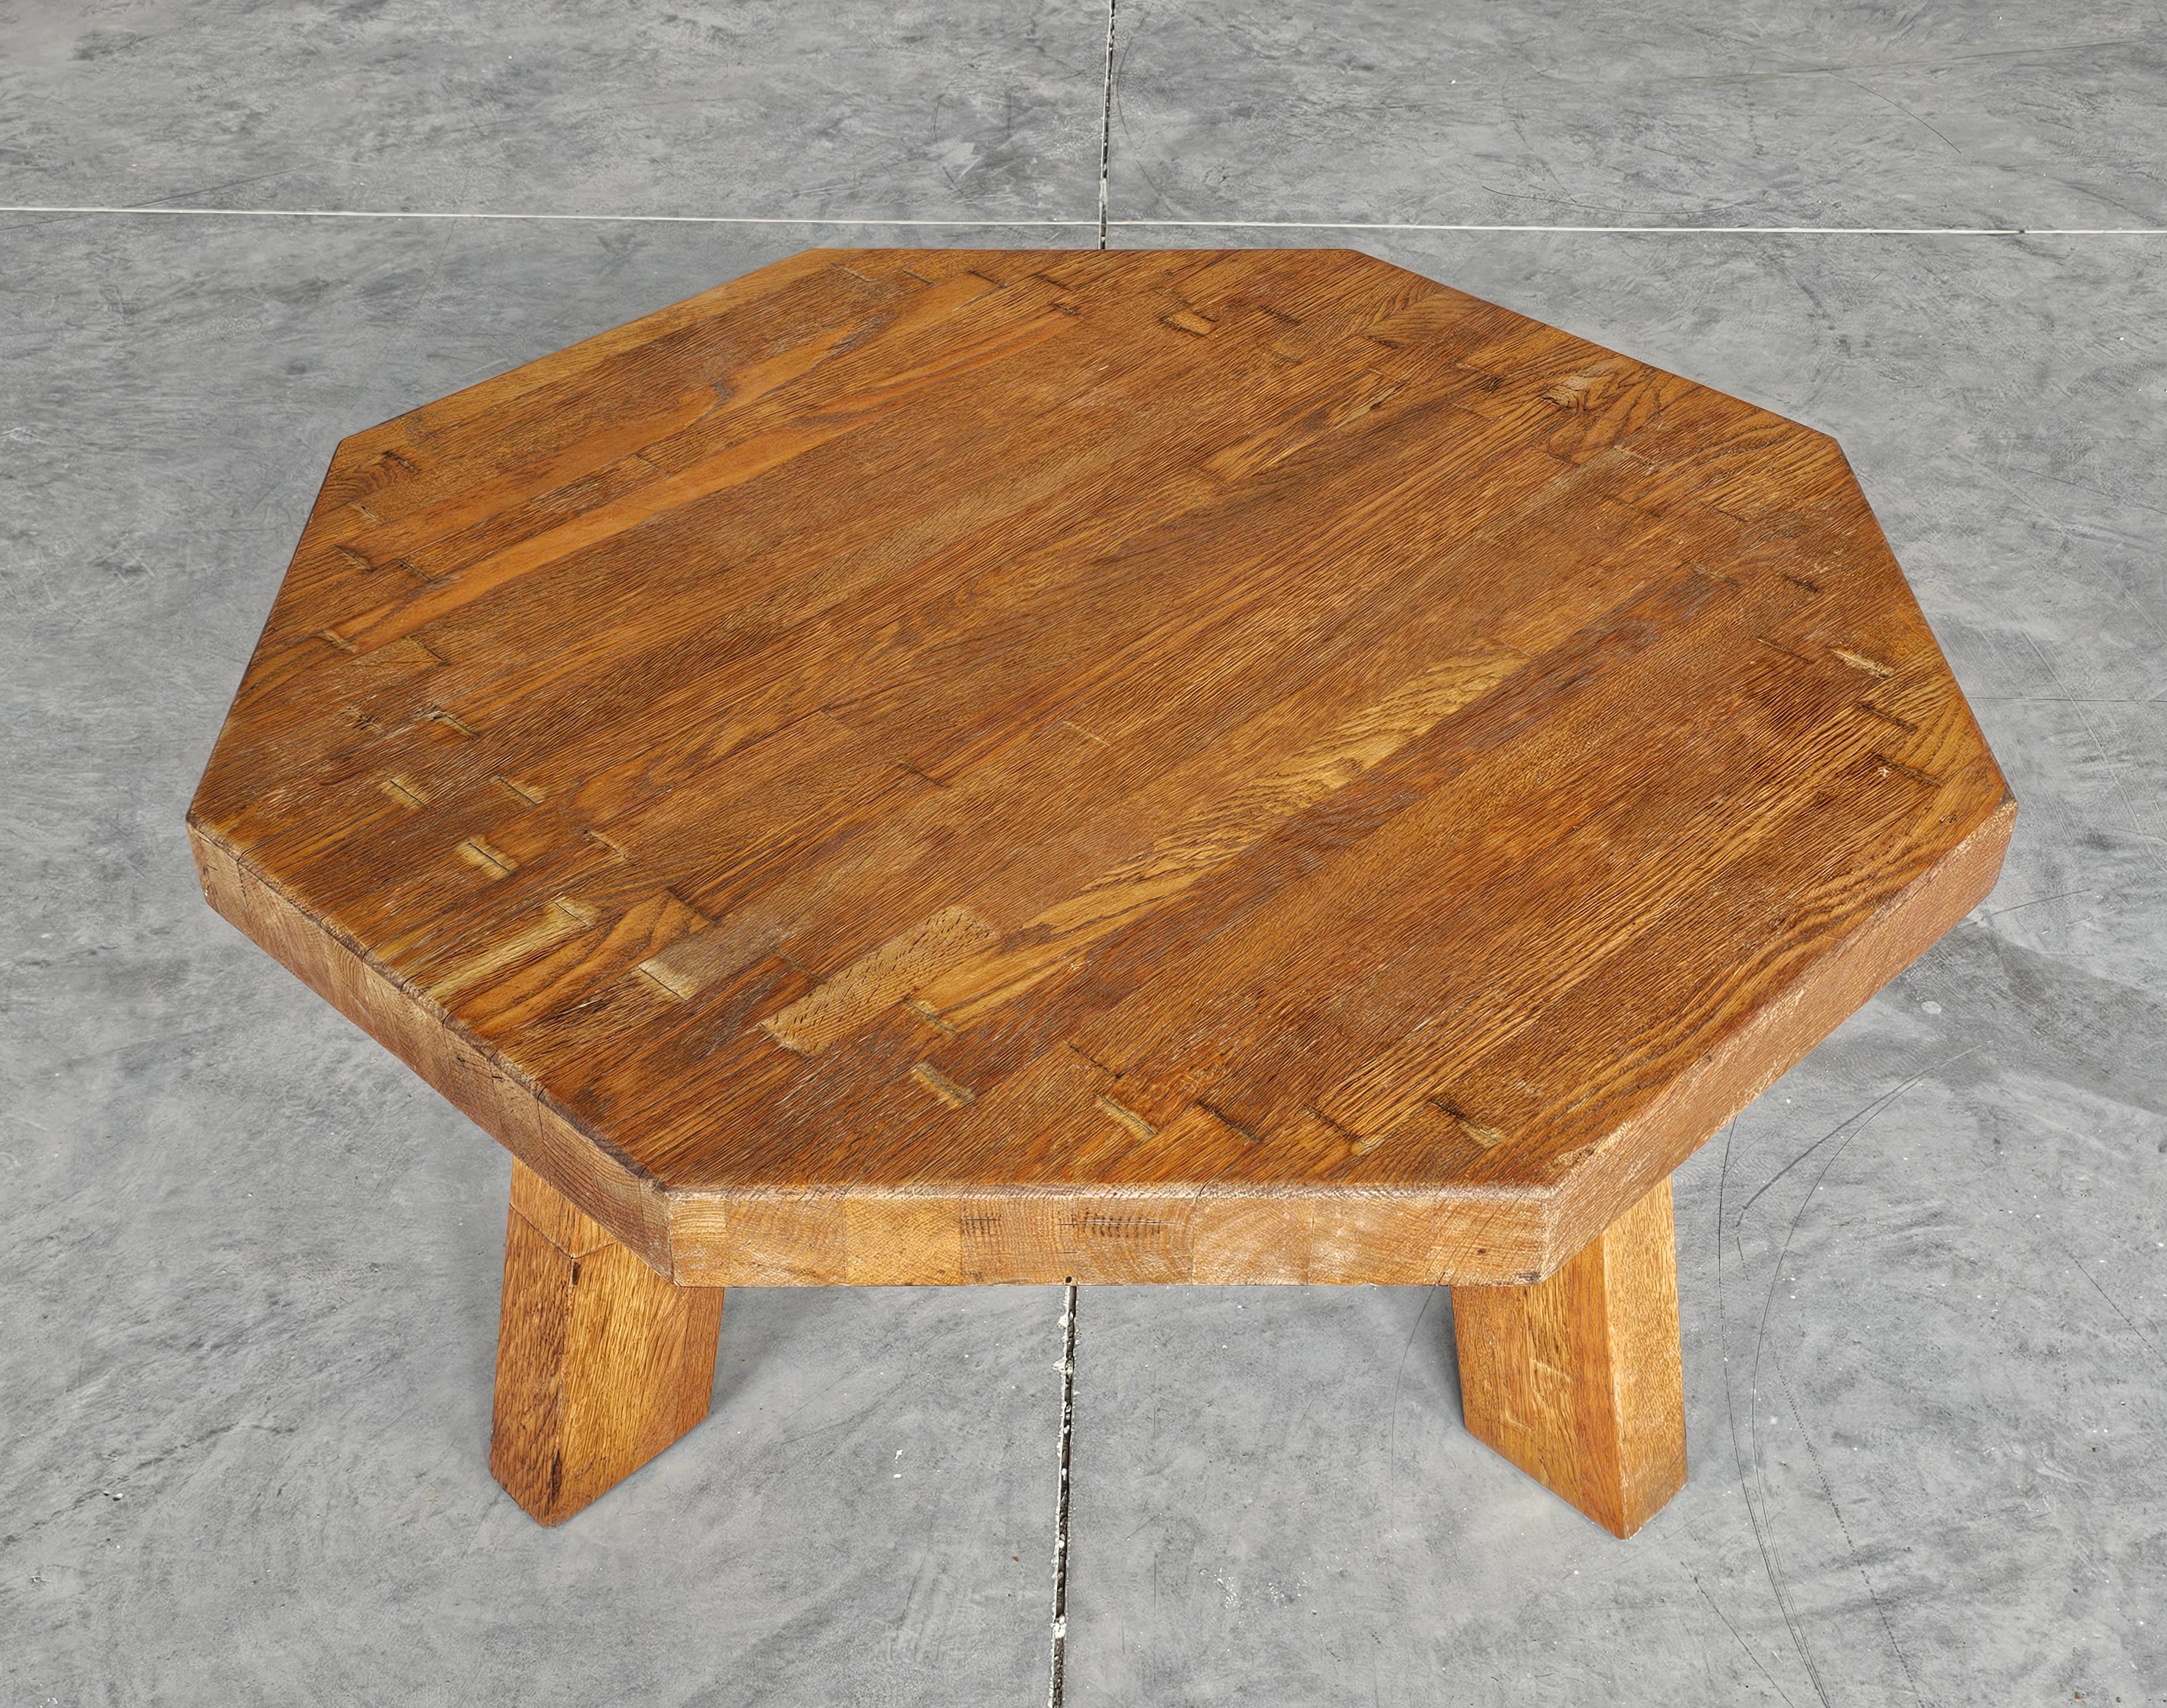 In this listing you will find a striking large Brutalist coffee table designed in style of Pierre Chapo. Table is done in solid oak, which makes it extremely heavy. Made in the Netherlands in the 1960s.

Good vintage condition with some signs of